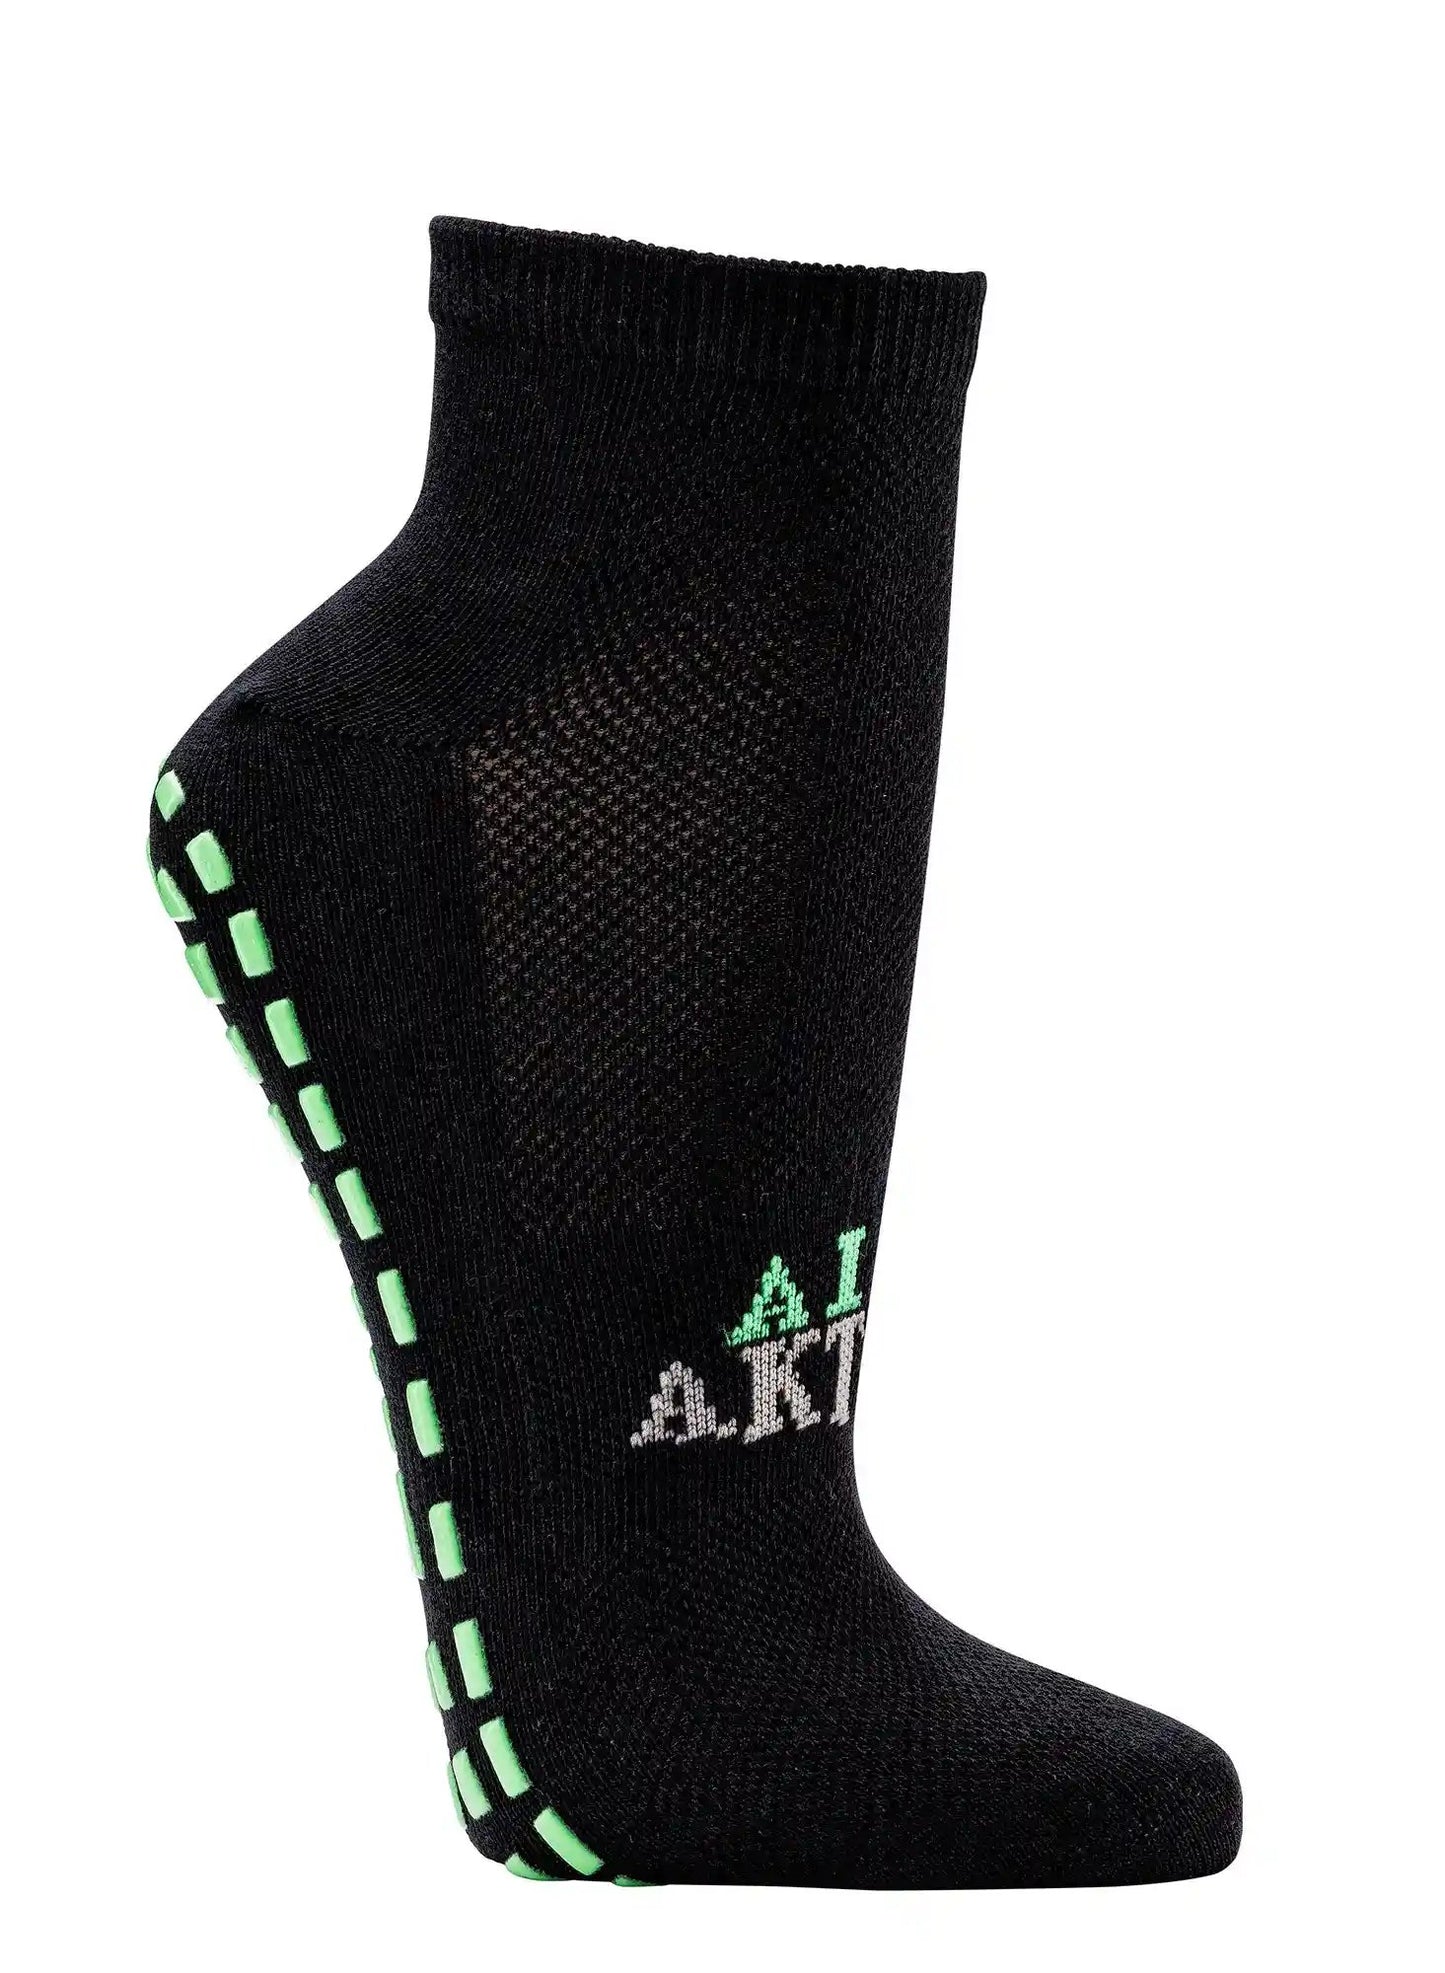 2 to 6 pairs of sports socks, sneakers with ABS socks, Fit Sox Jump Socks, anti-slip